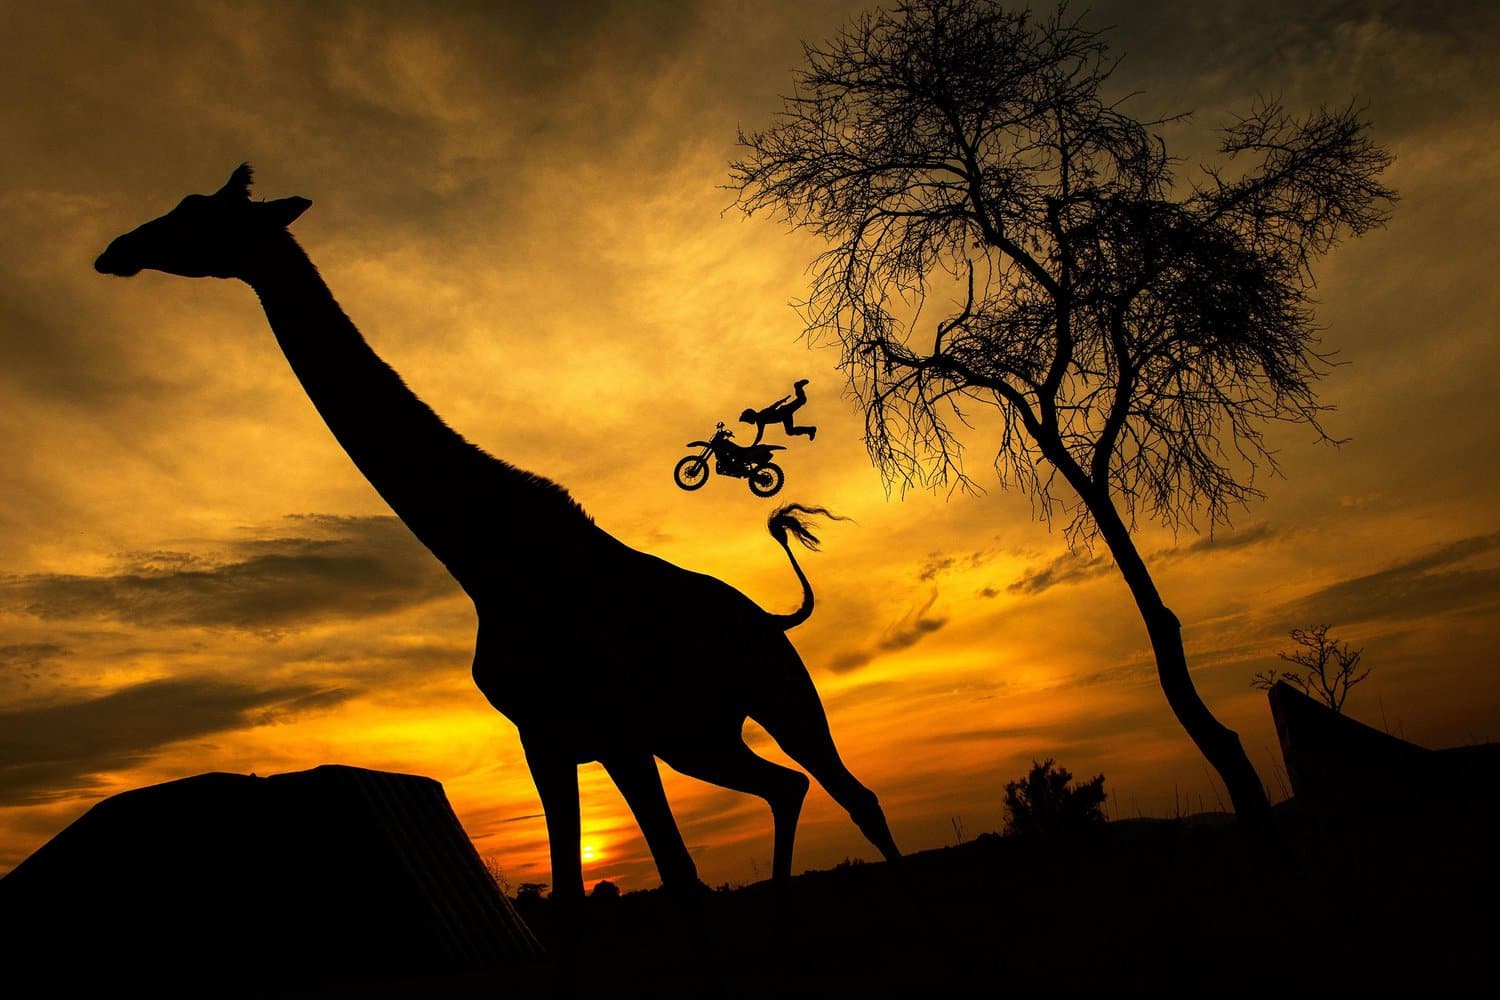 Maikel Melero of Spain warms up in the South African savanna prior to the fifth stage of the Red Bull X-Fighters World Tour in Pretoria.